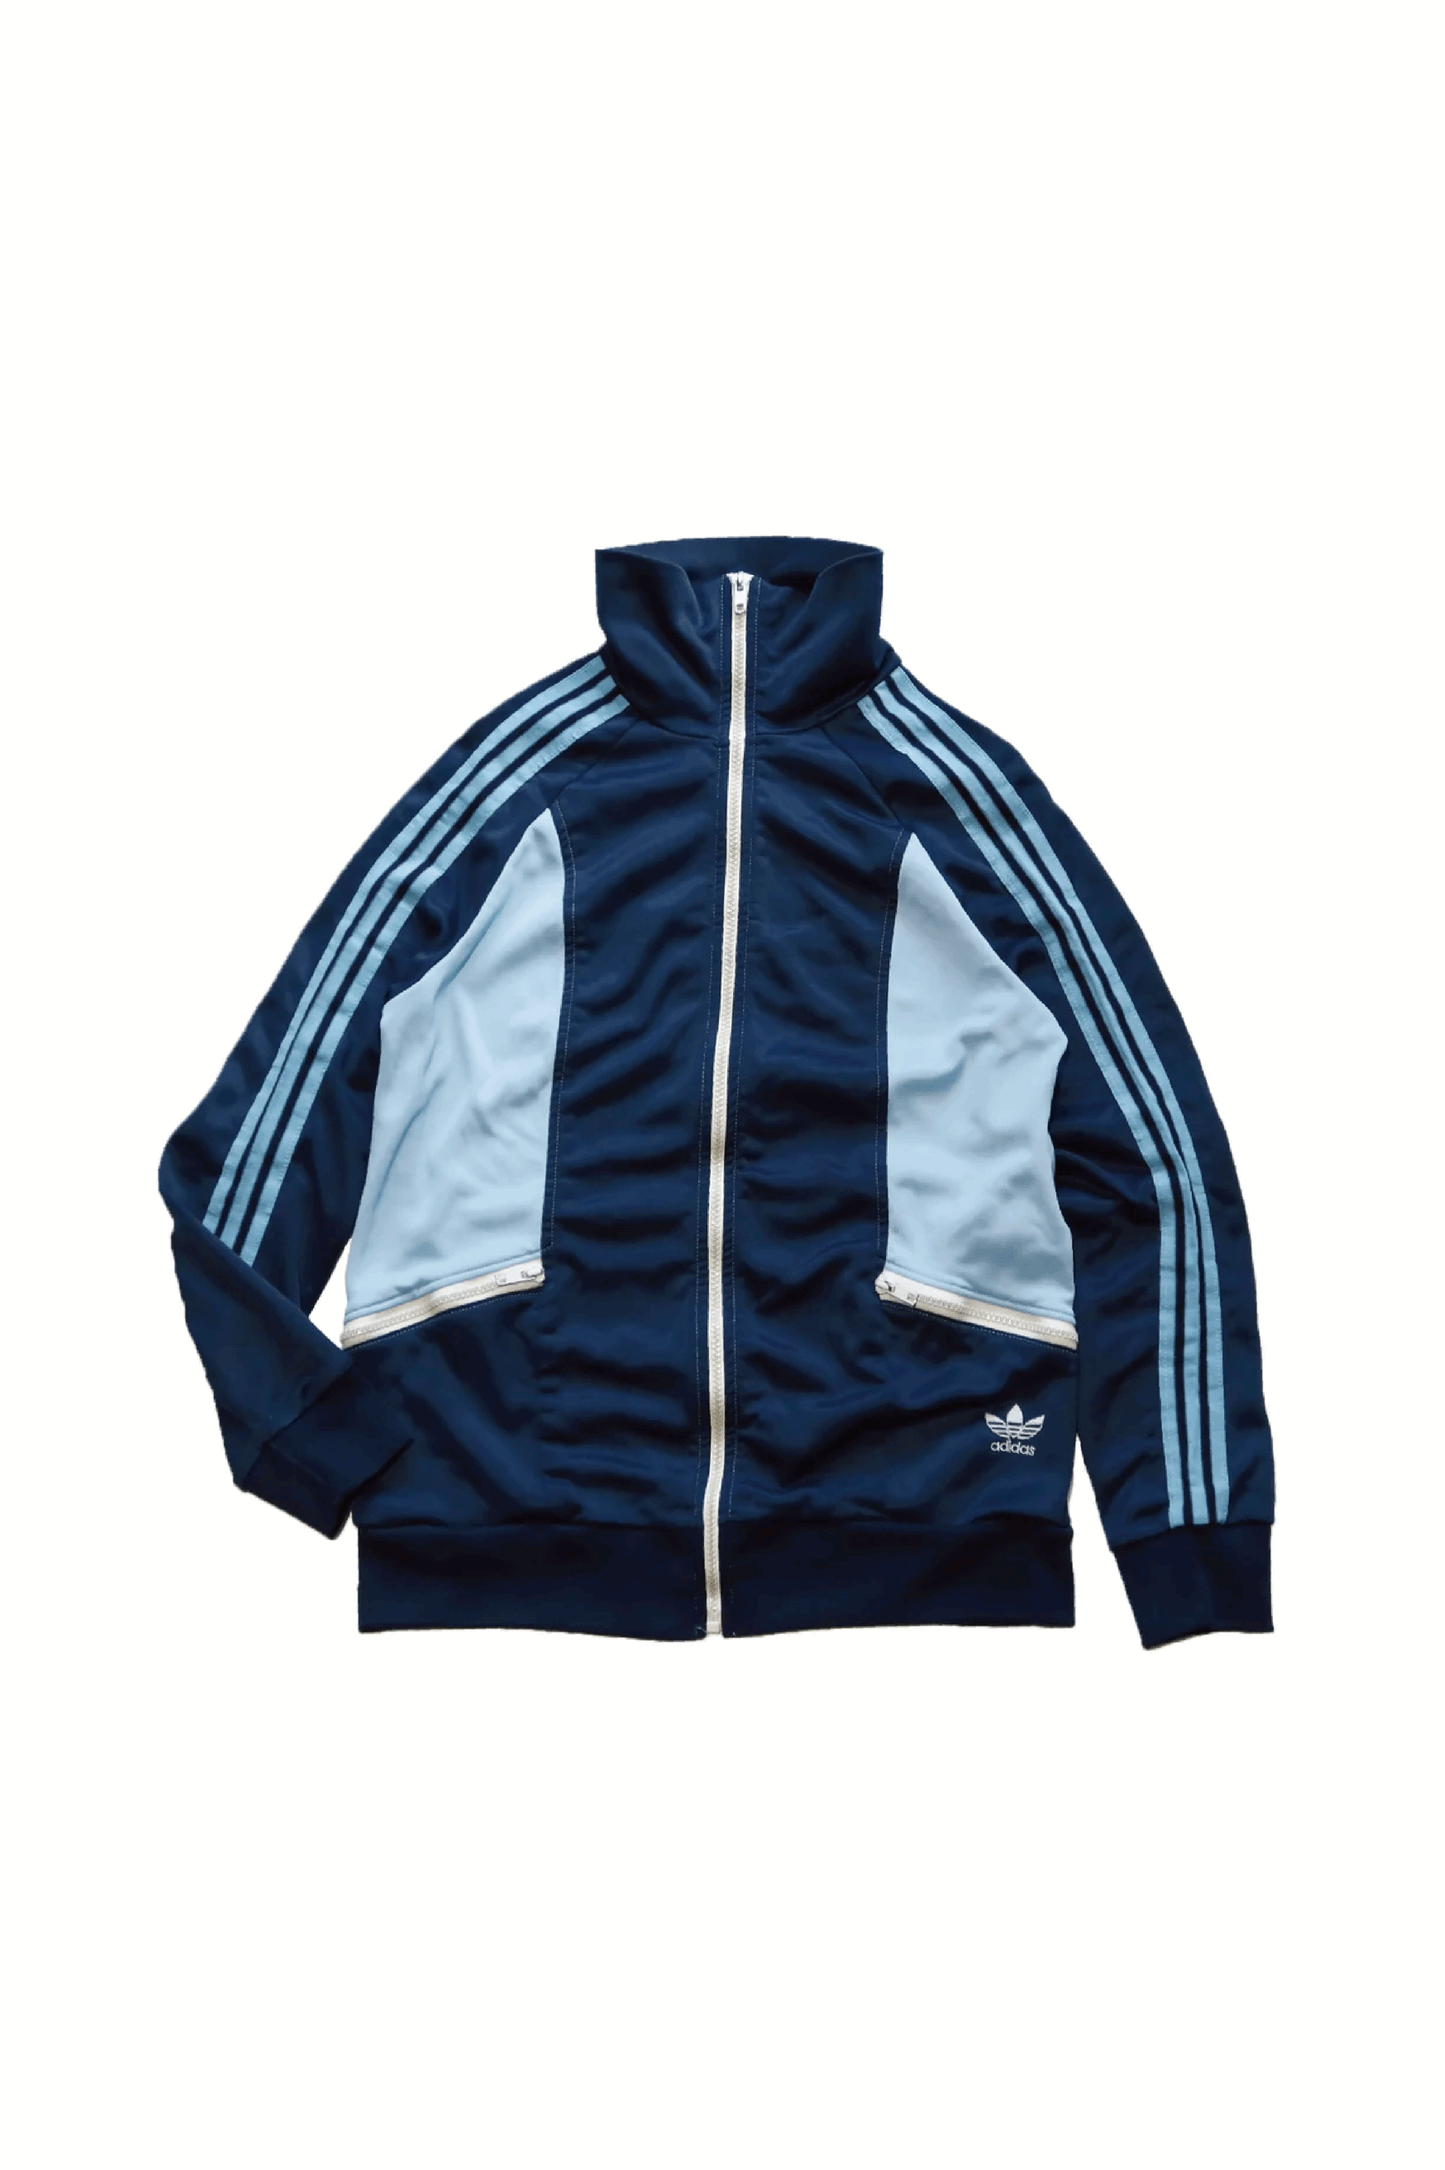 70s Adidas Ventex Track Jacket Made in France